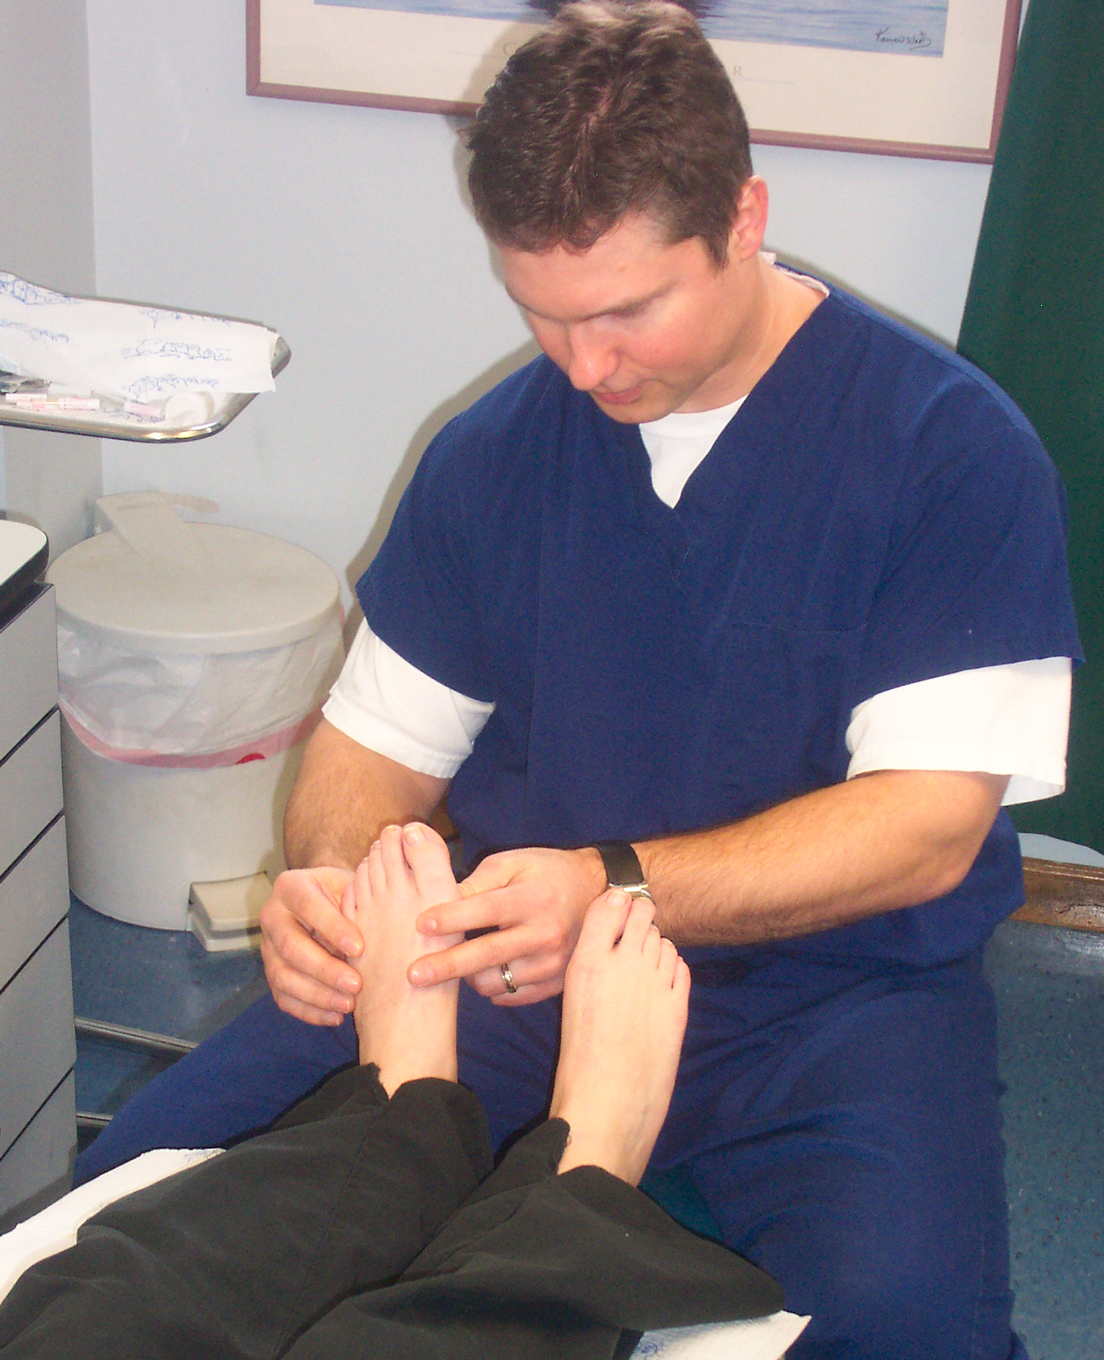 Dr. Fosdick takes care of childrens' feet